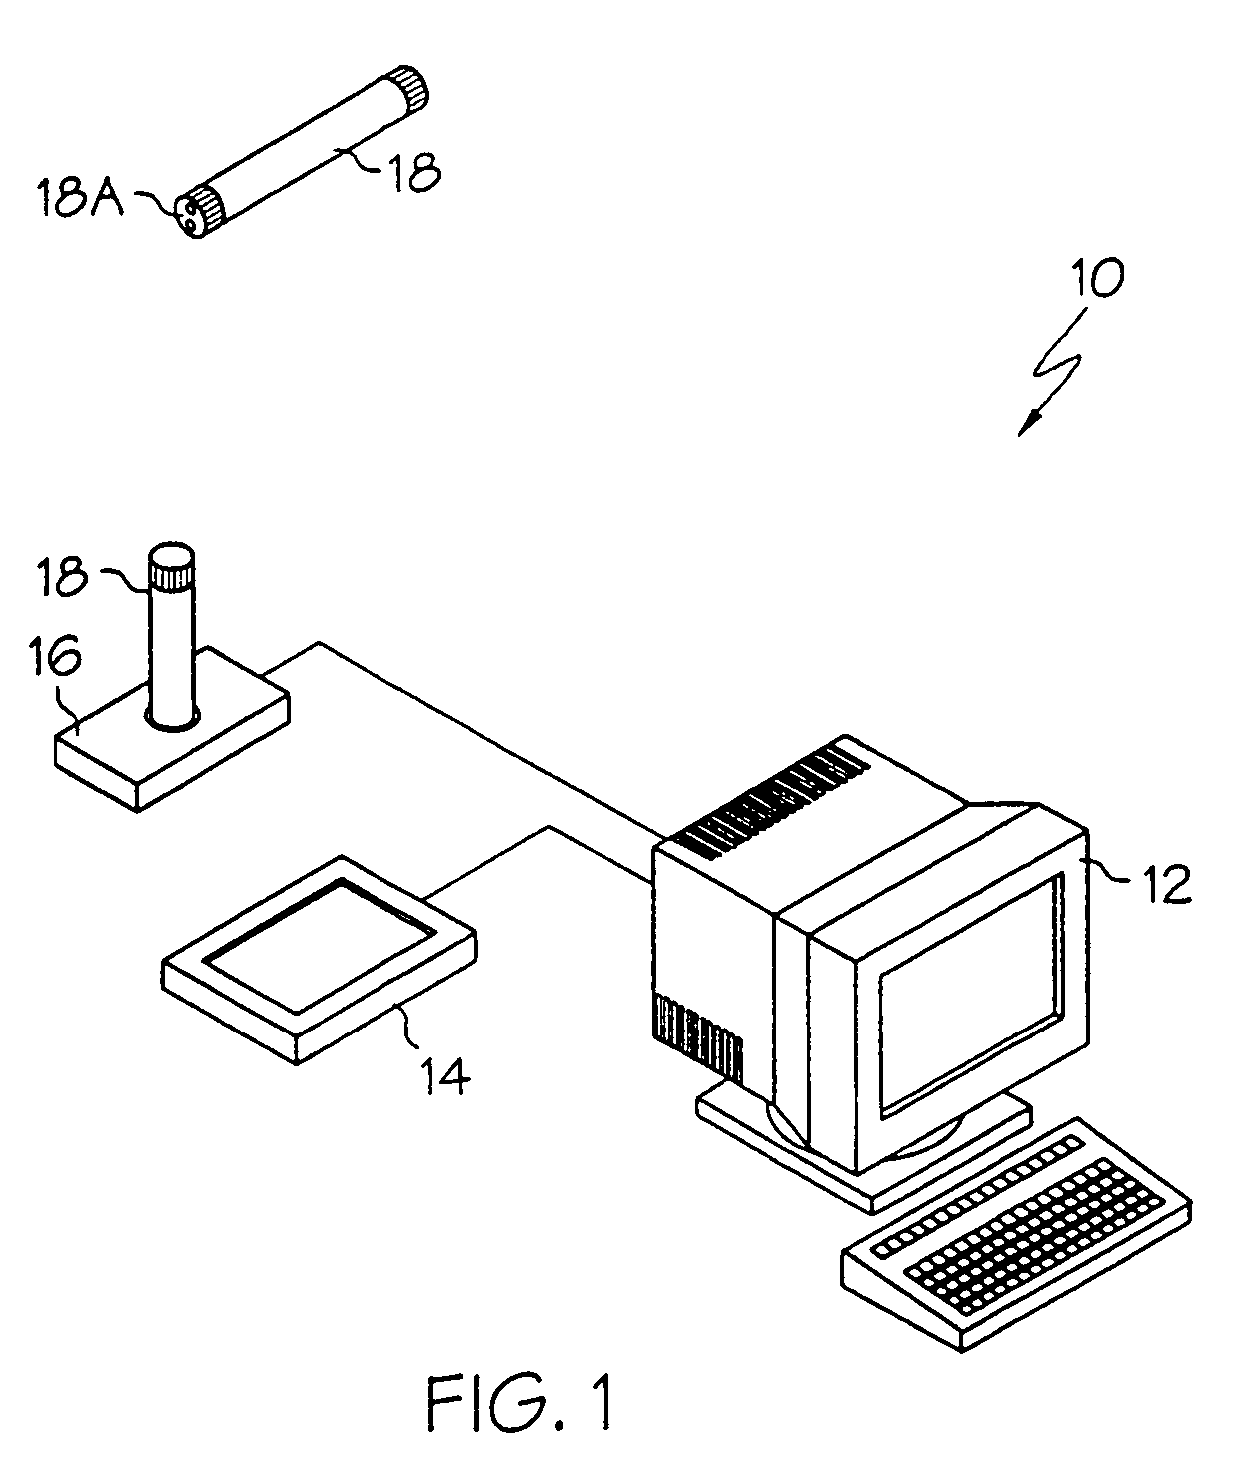 Method and apparatus for presenting linked life stories